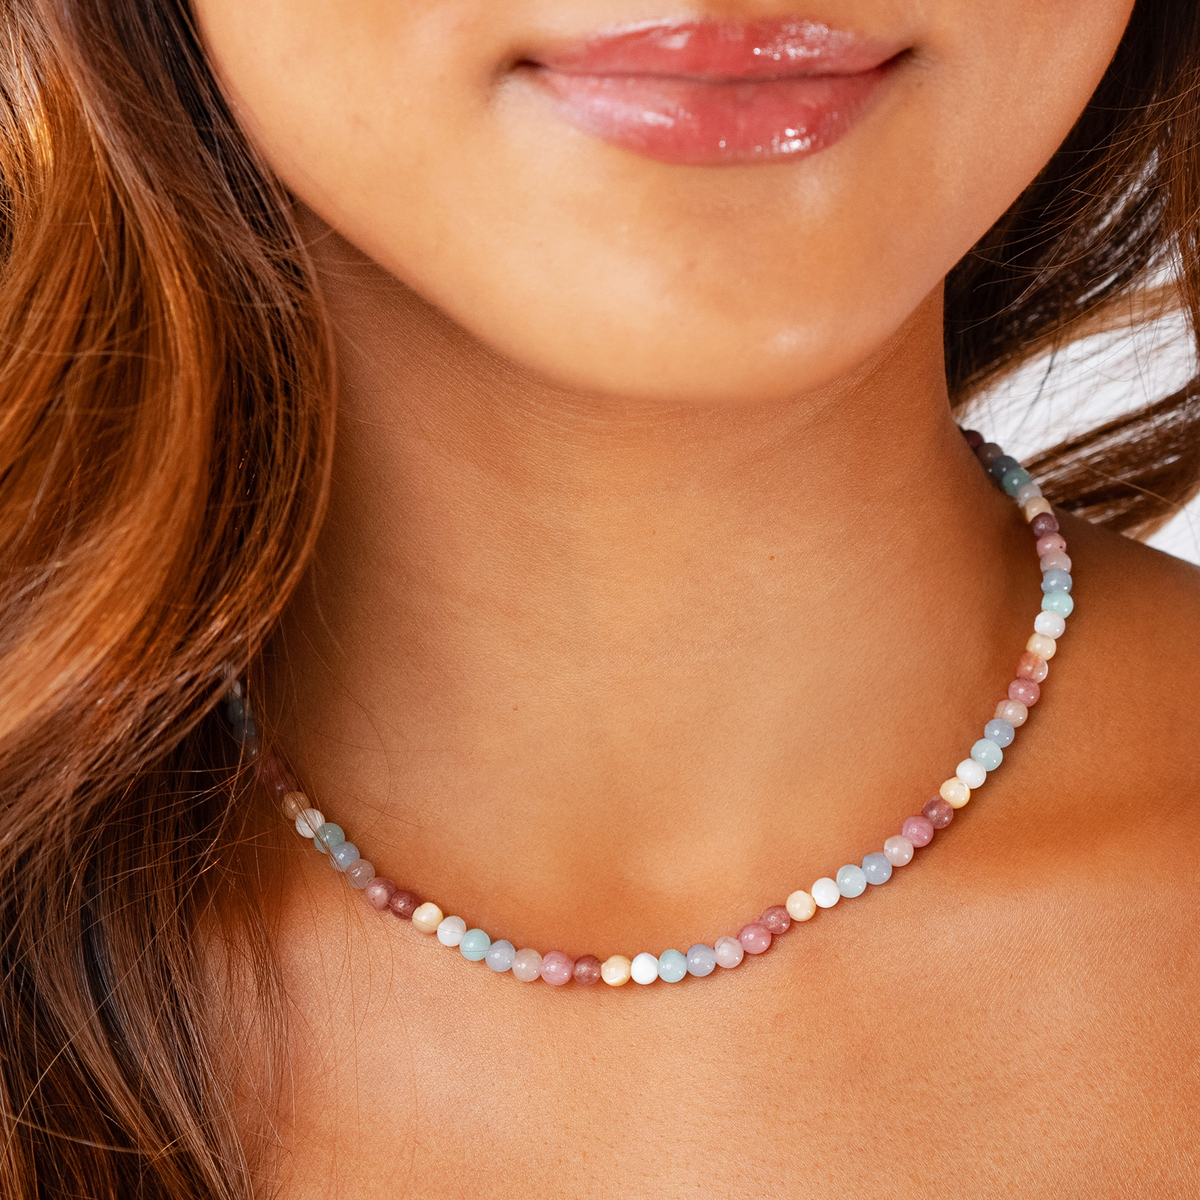 Model wearing a 4mm blue, white, and pink stone healing necklace